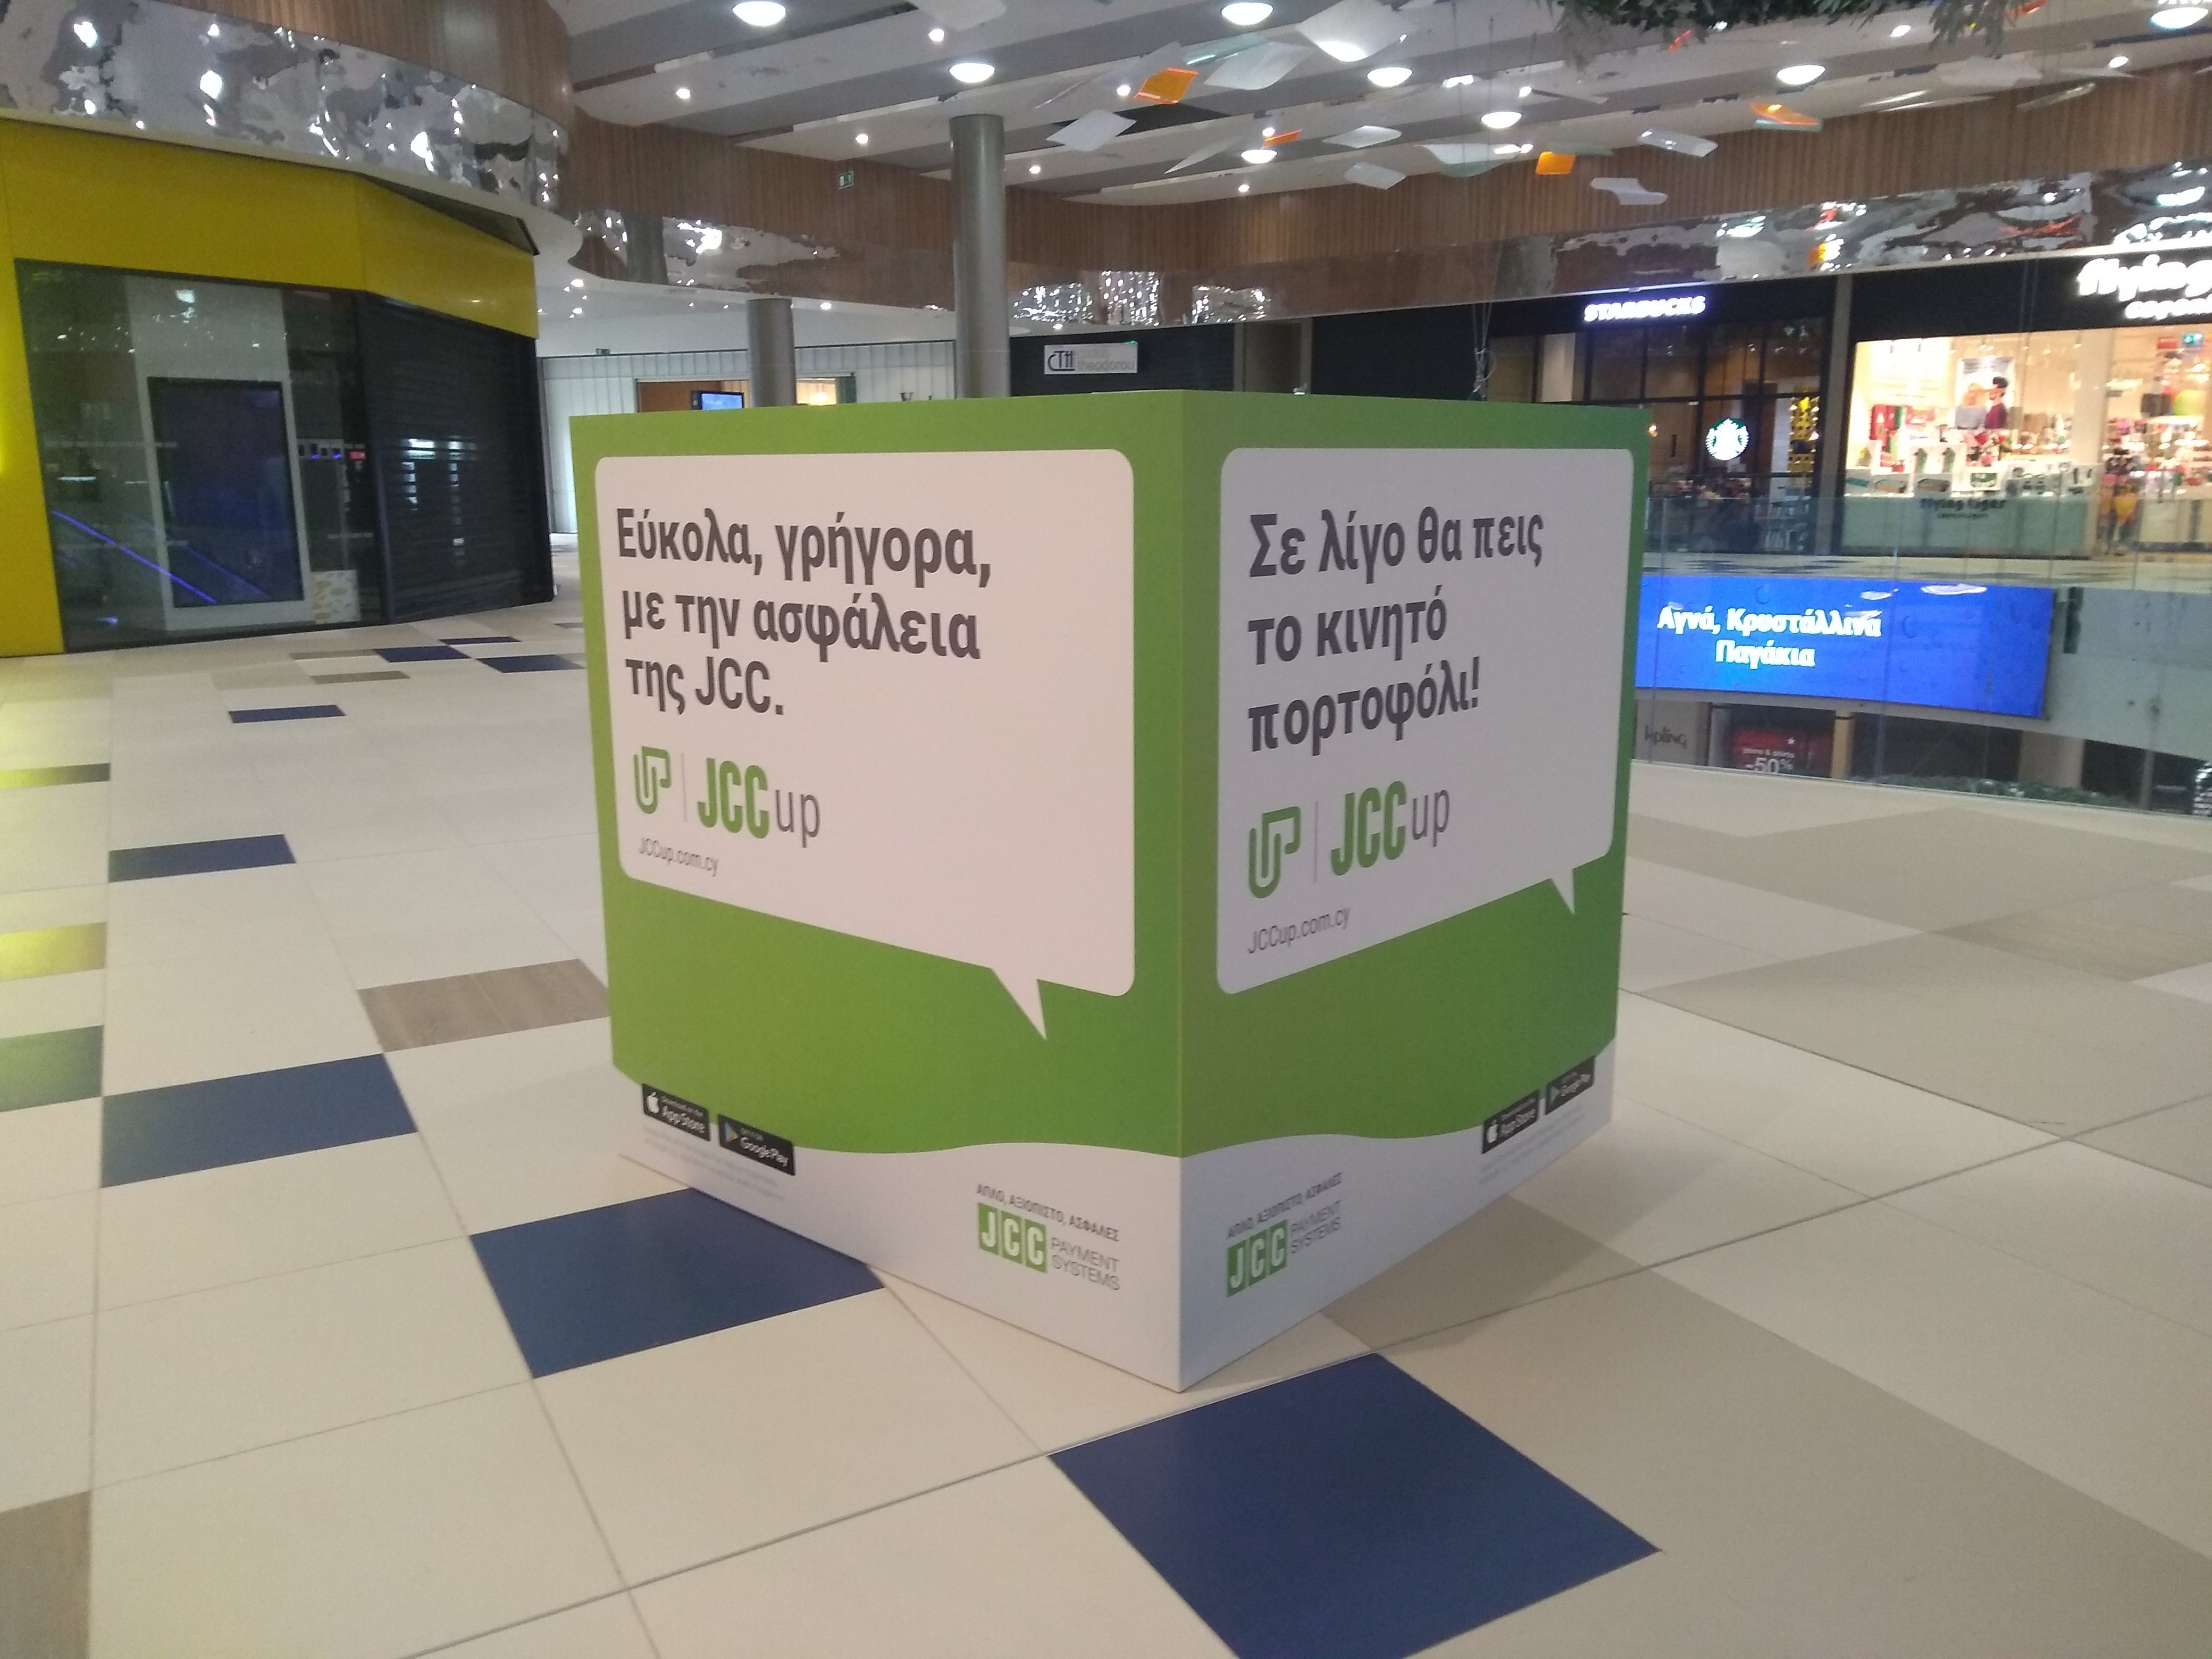 JCCup Promotional Event at the Nicosia Mall